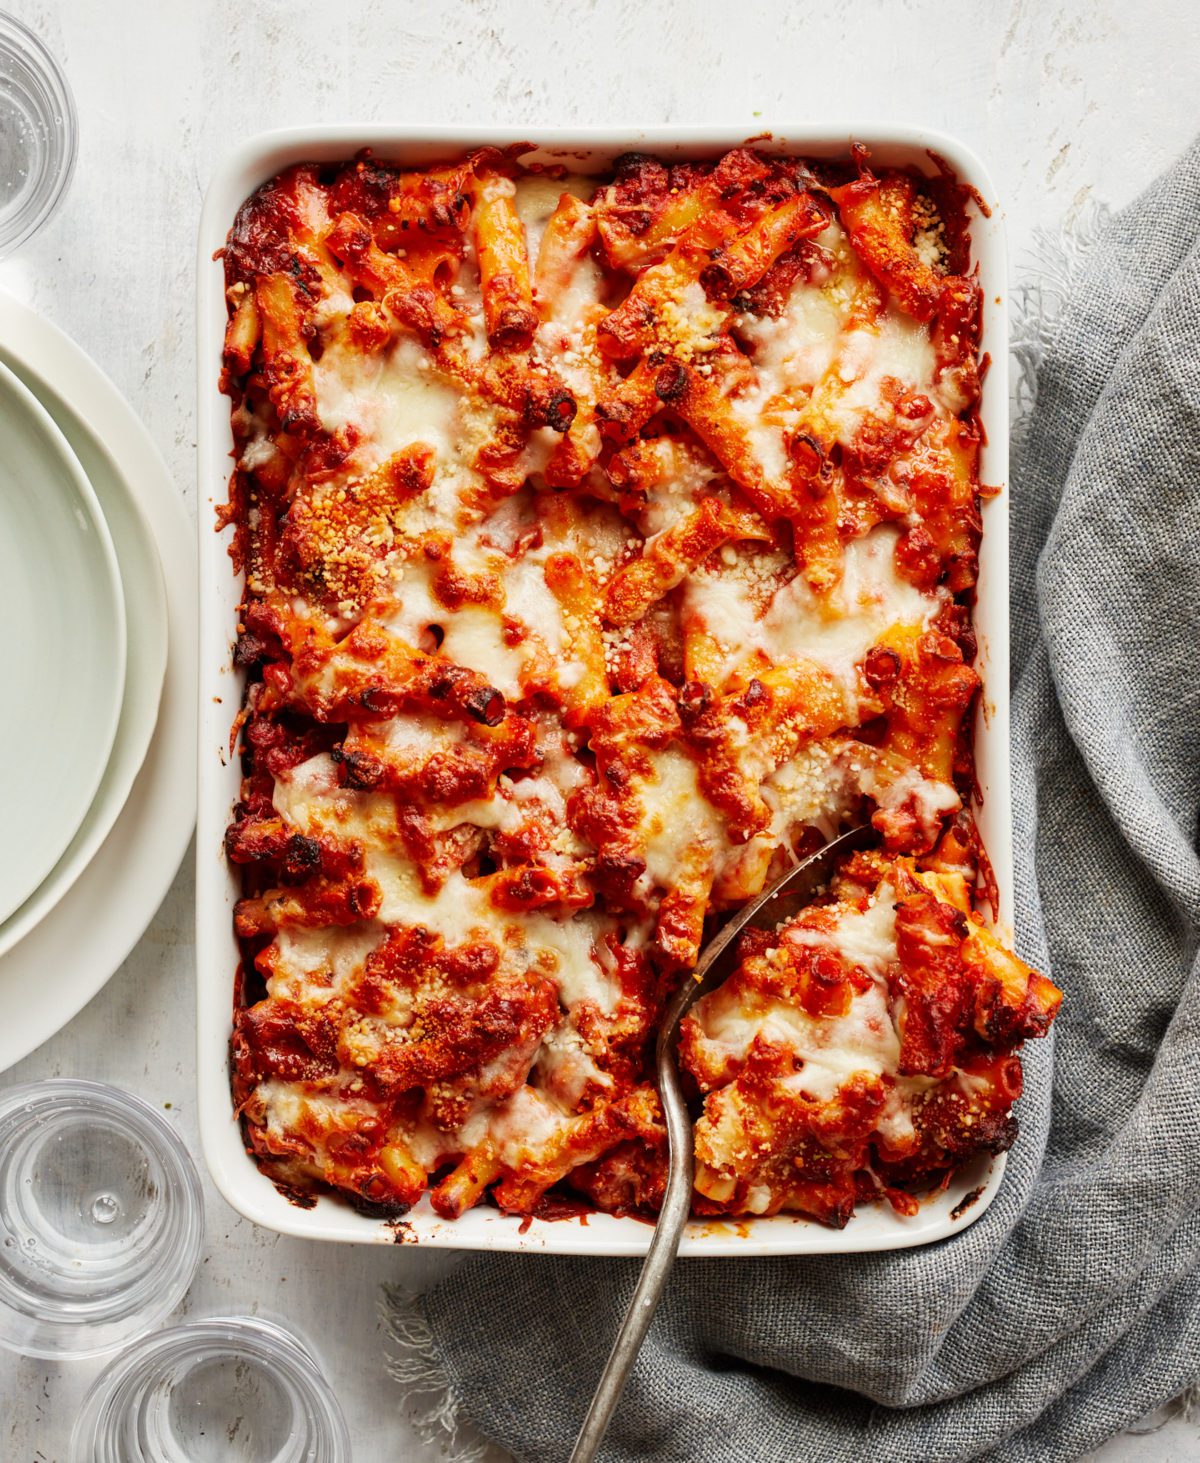 Baked Penne with Italian Sausage Recipe